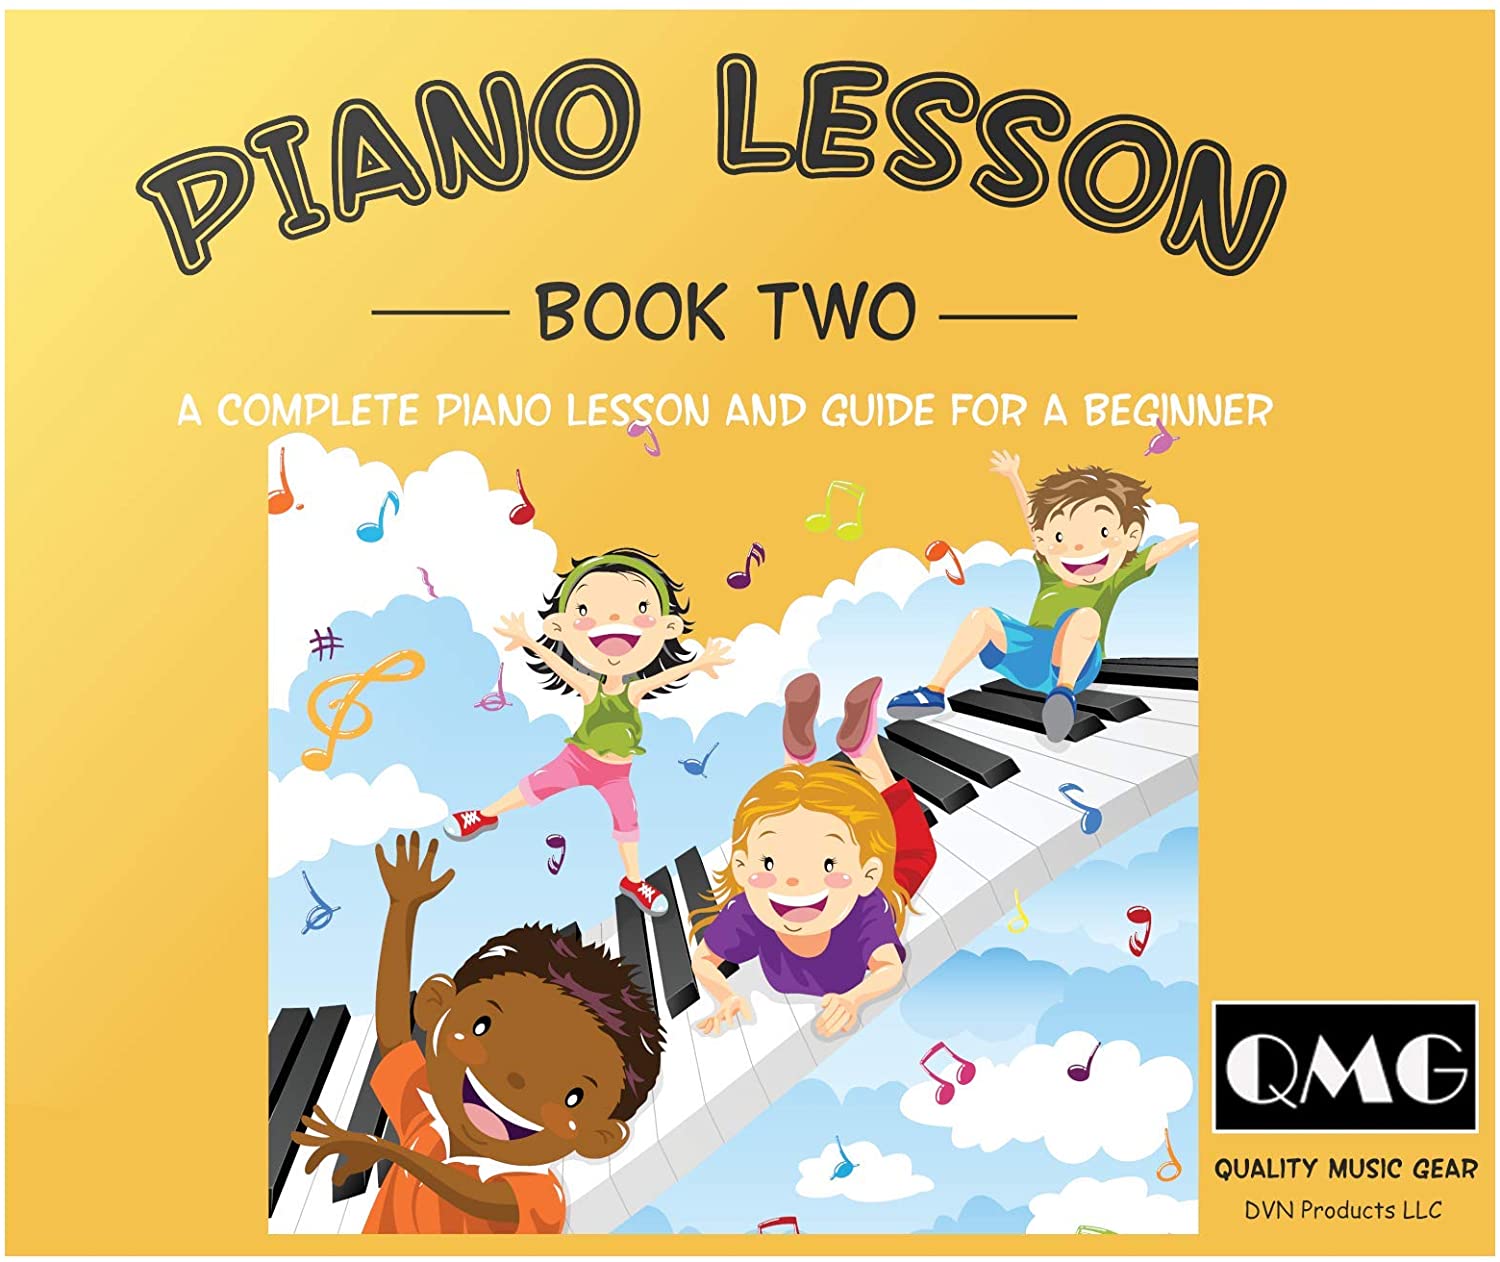 Piano Lessons Book 2 - Quality Music Gear